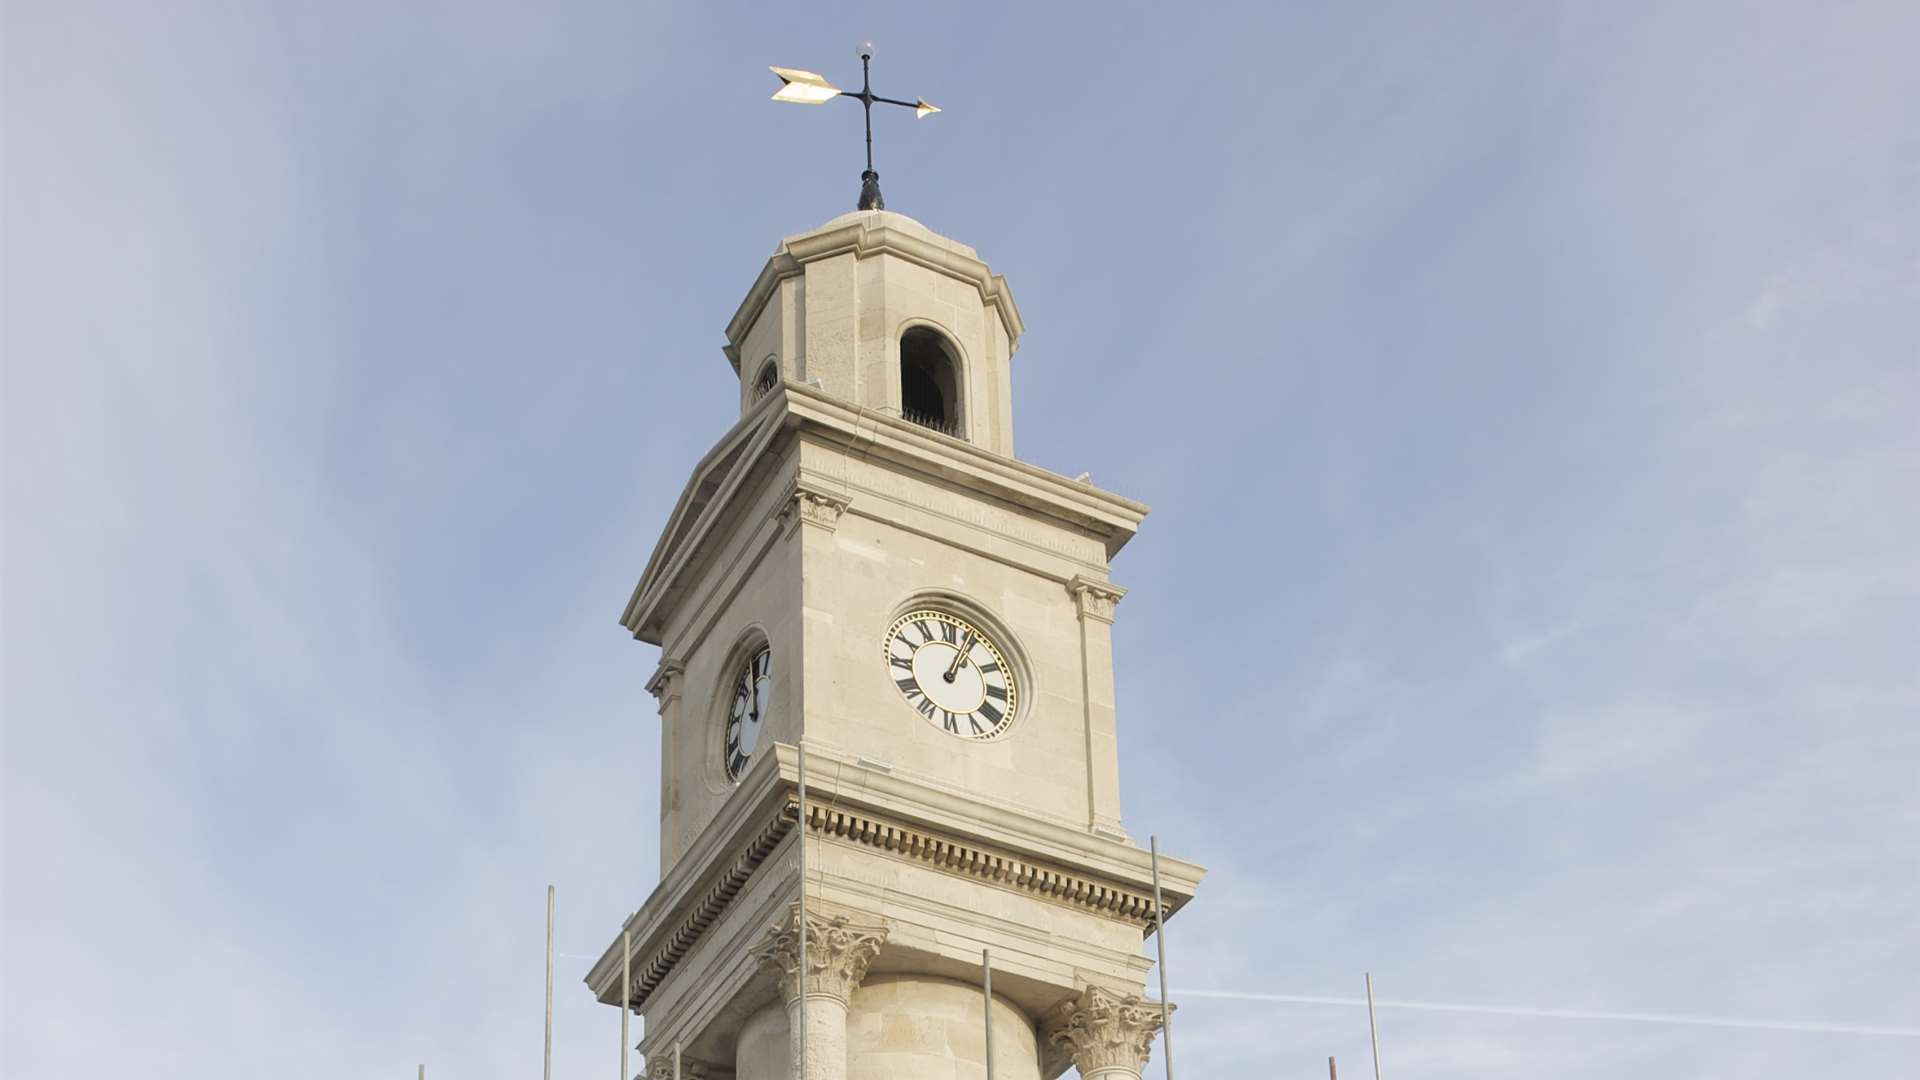 Improvements to Herne Bay's Clock Tower are nearly complete